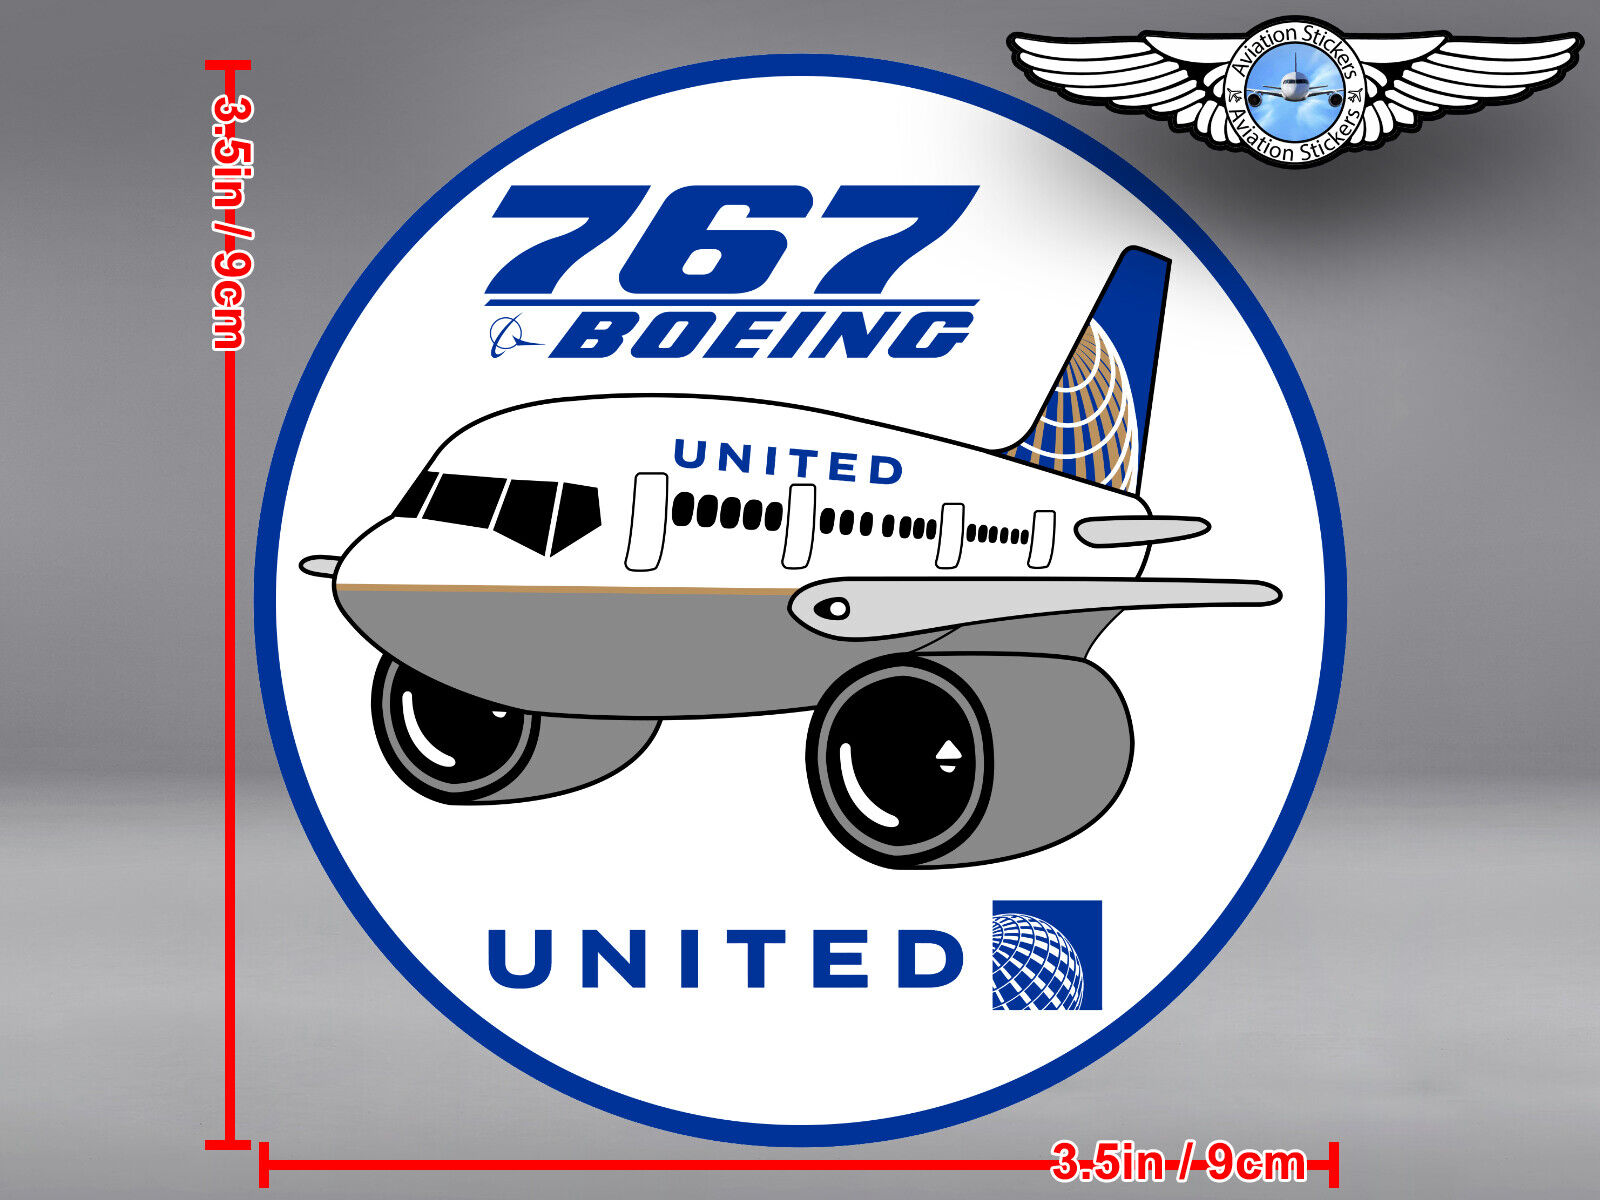 UNITED AIRLINES UAL PUDGY BOEING B767 B 767 DECAL / STICKER